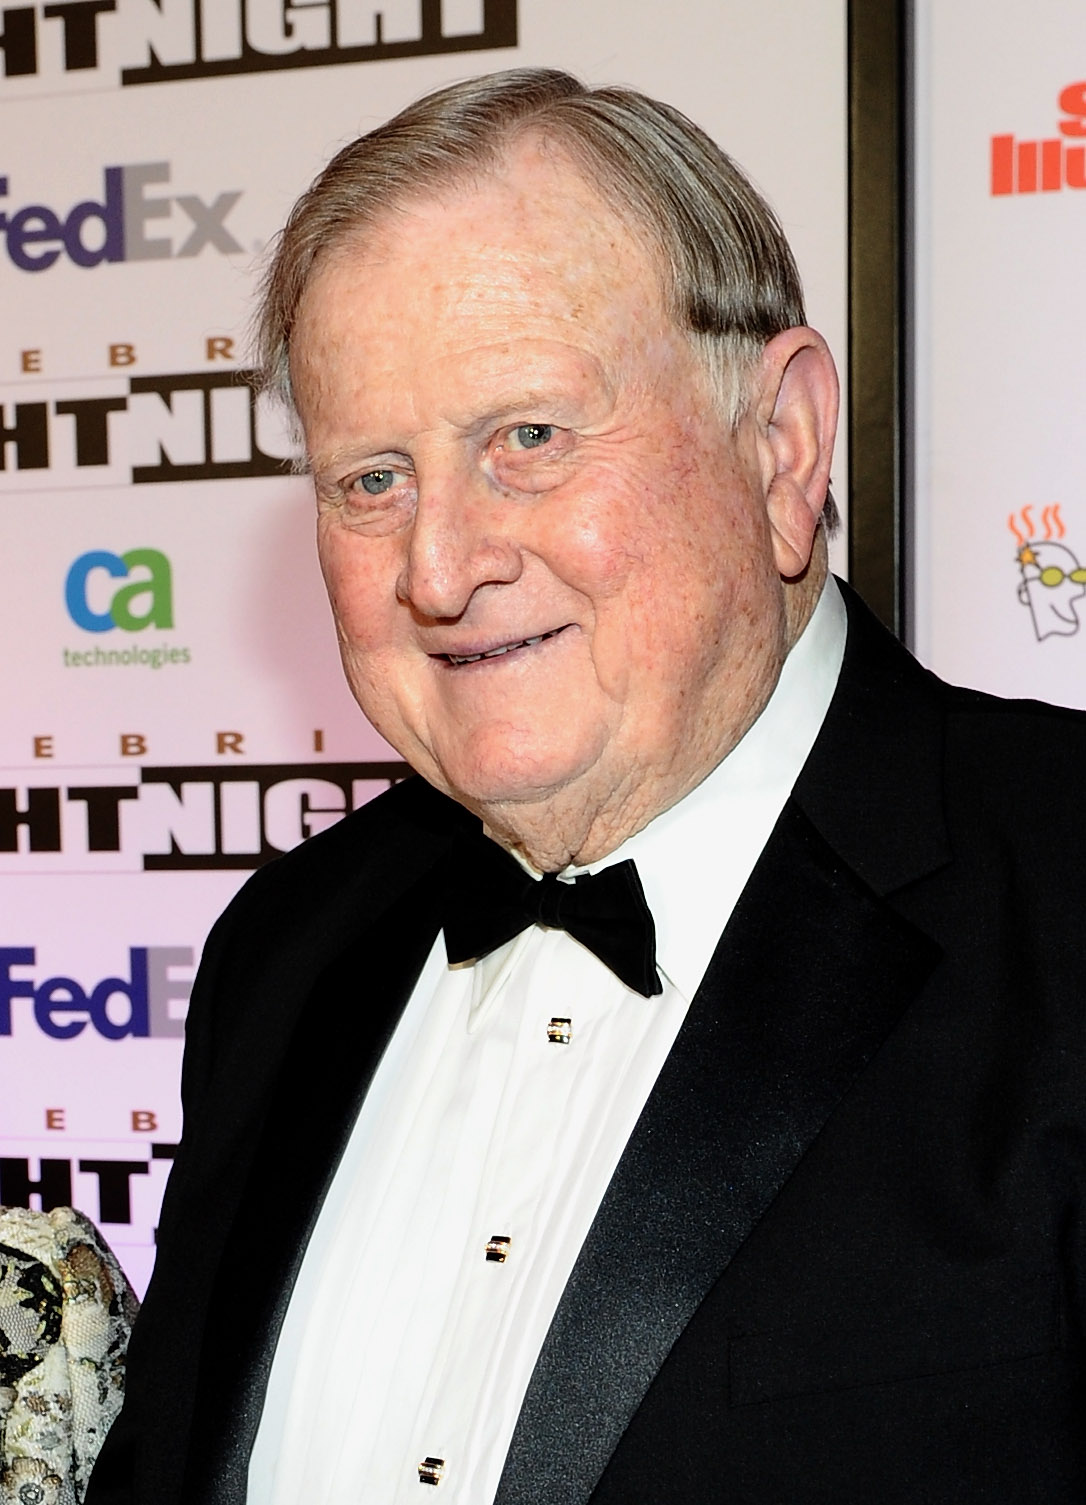 Red McCombs photo 3